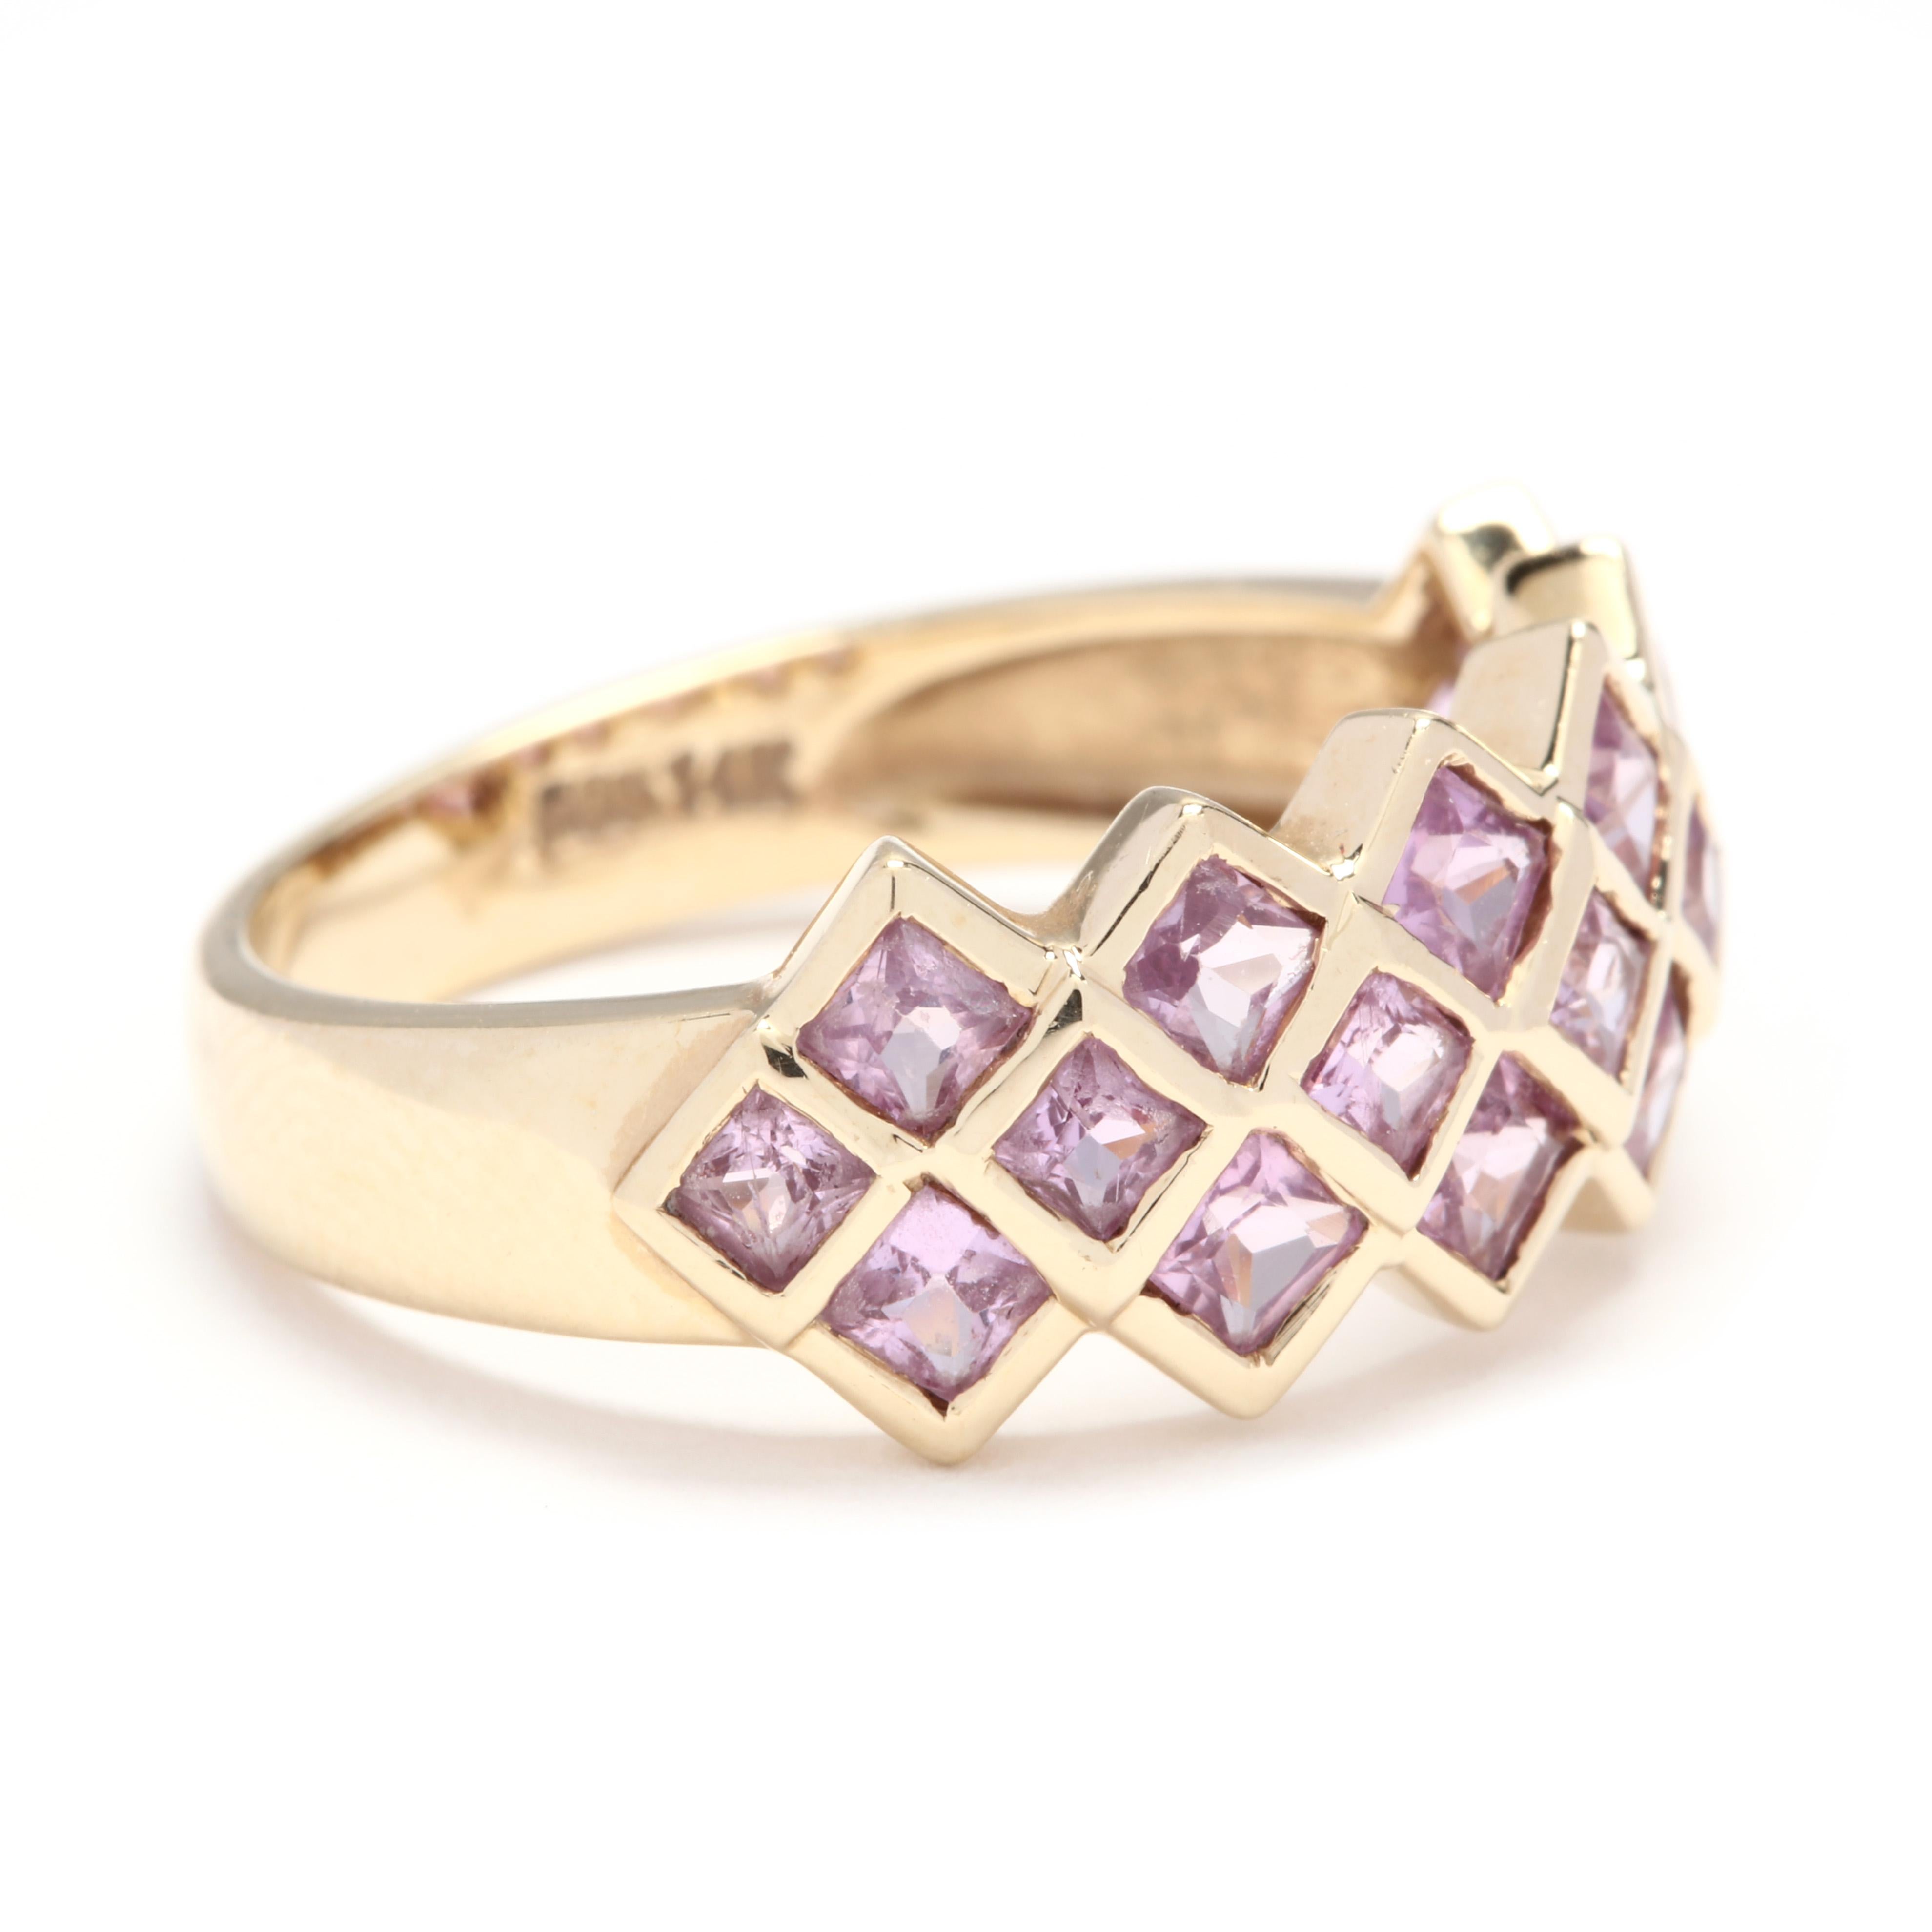 14k yellow gold pink topaz three row band ring. A unique, wide band consisting of three rows of bezel set, square pink topaz. They range from 2 to 2.5mm and weigh approximately 2 total carats. Funky and a little modern this band is a great statement